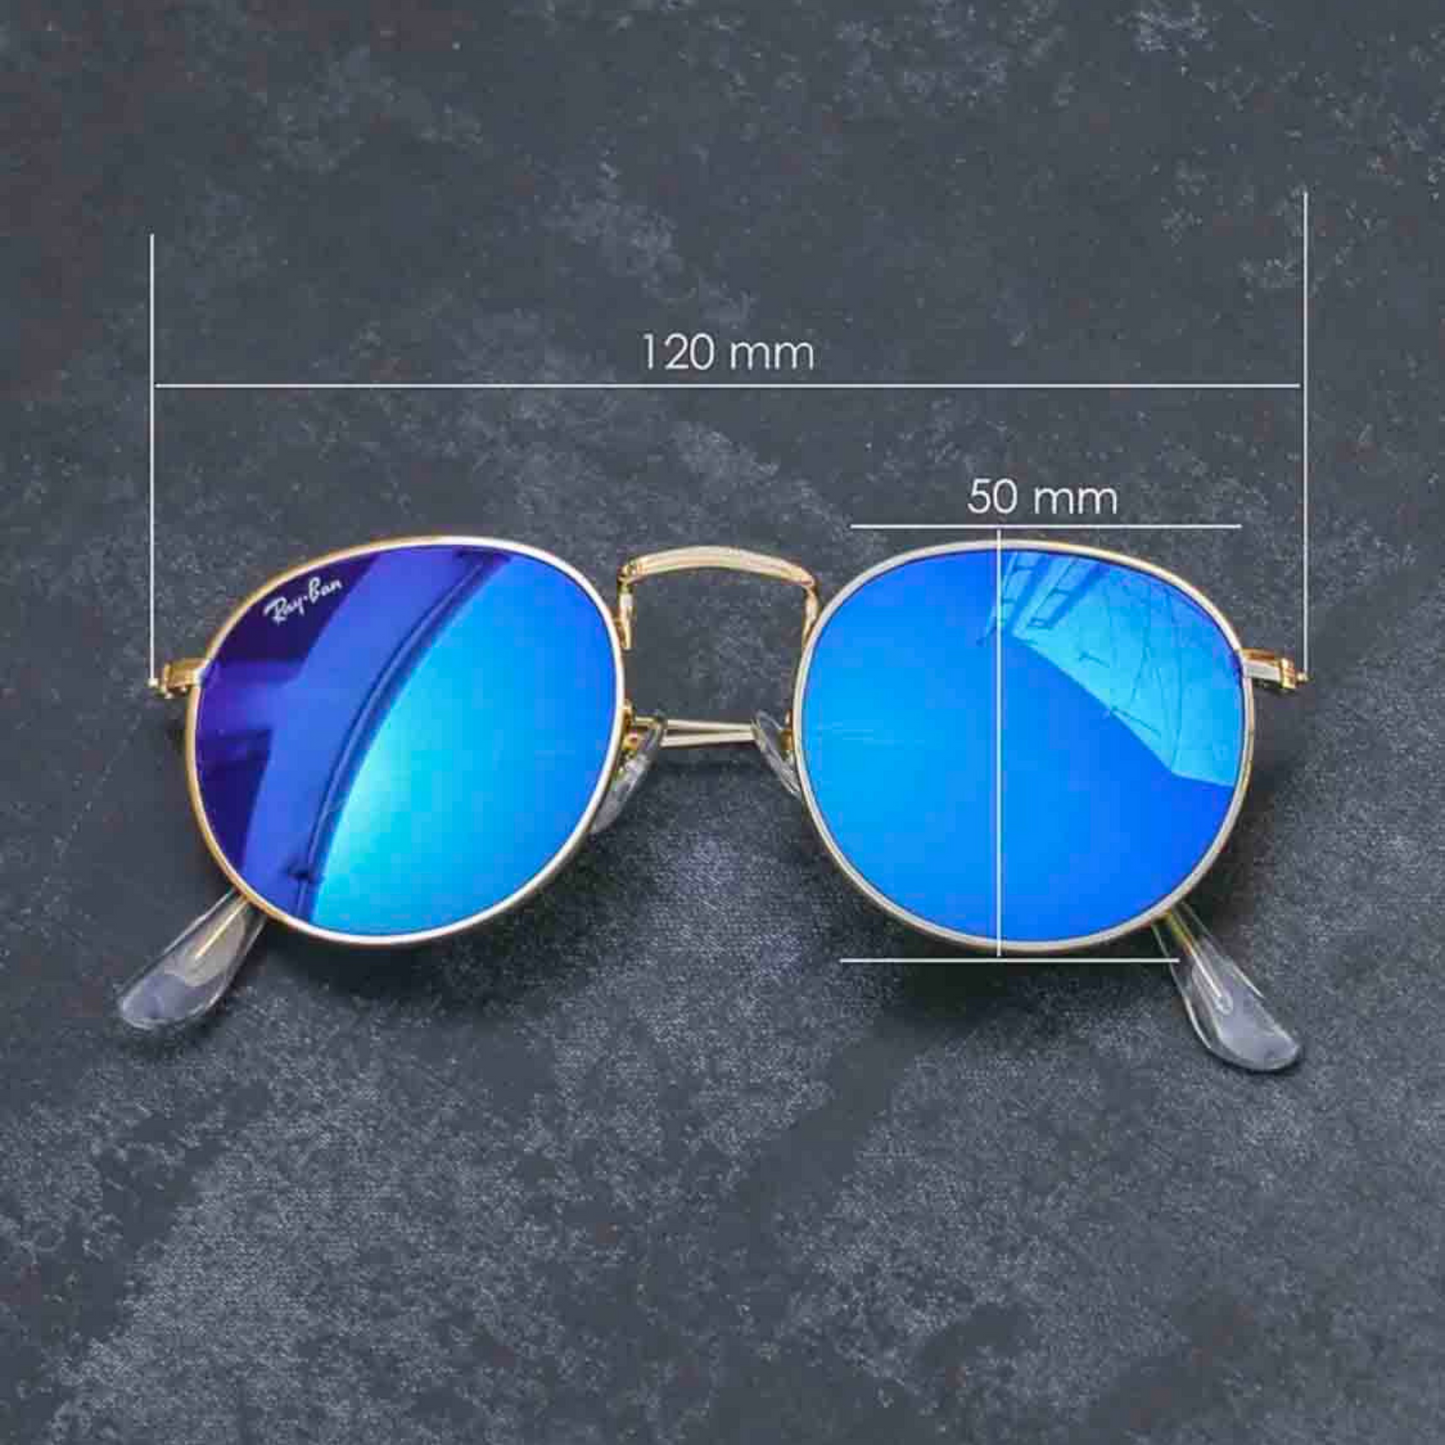 New Stylish Attractive Blue & Gold 3447 Round Sunglass For Unisex